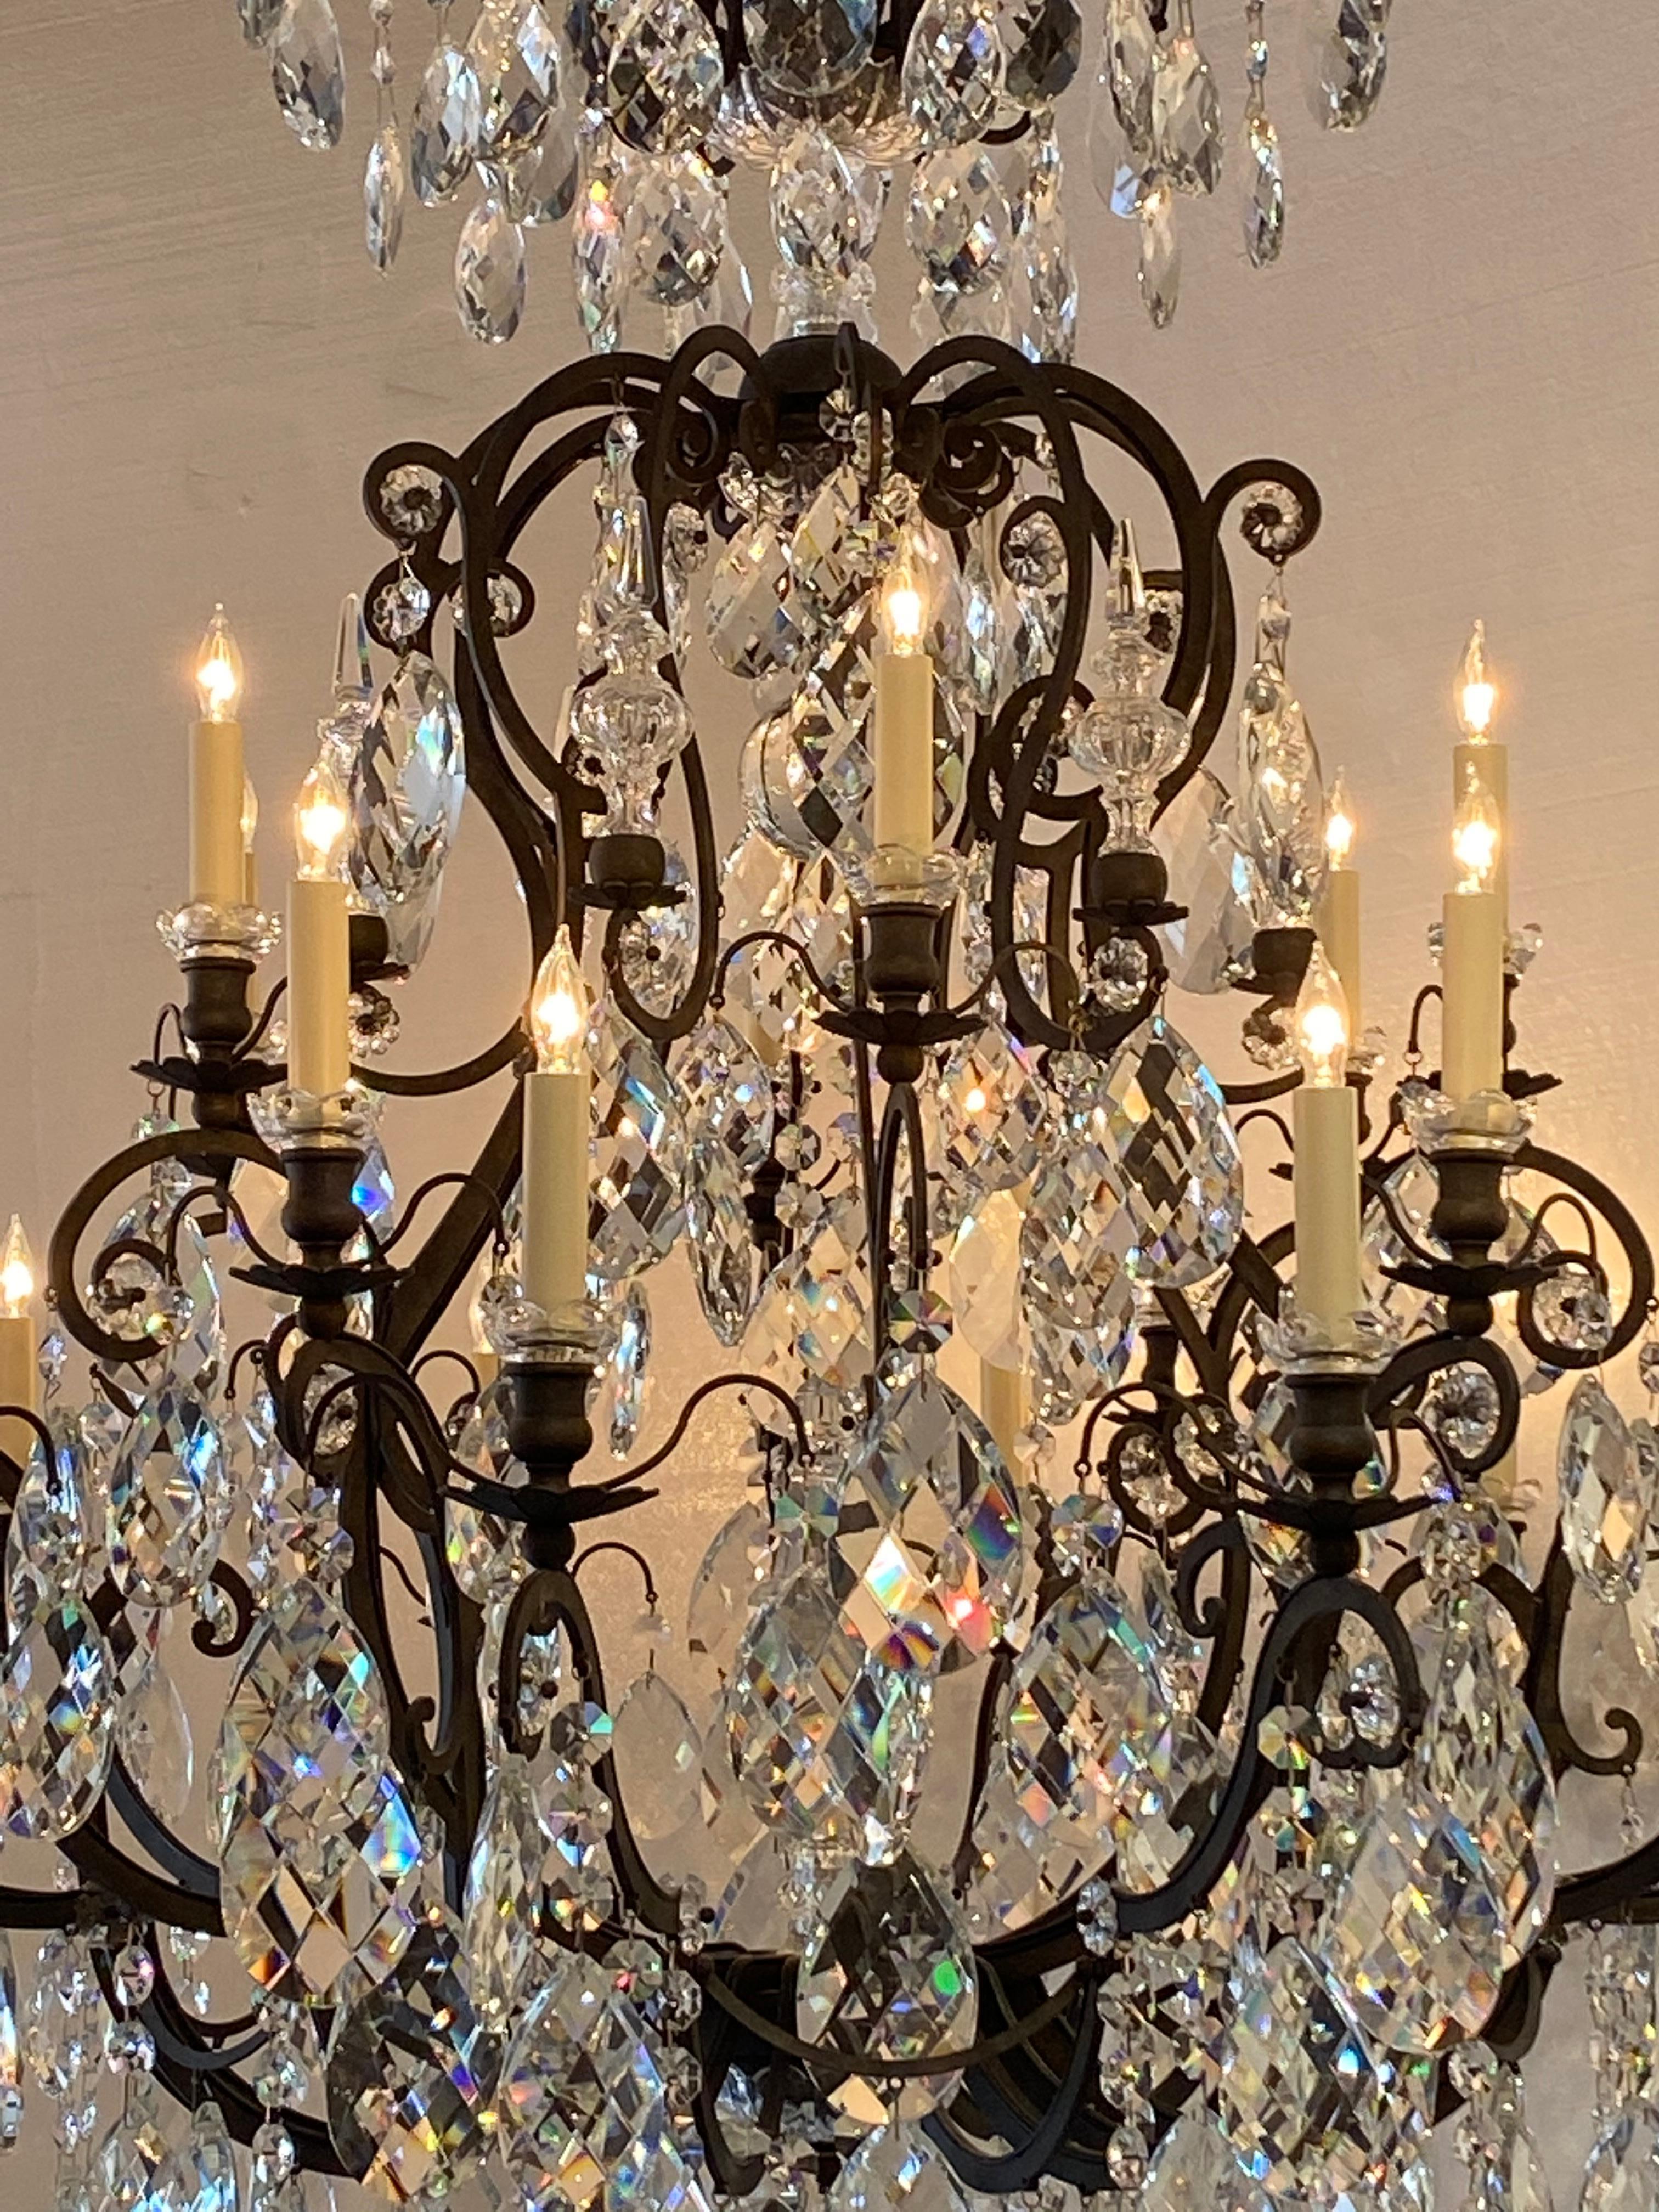 Large bronze crystal chandelier with crystal late 19th century in excellent conditions.
24 lights, certifies, American wired and ready to install.